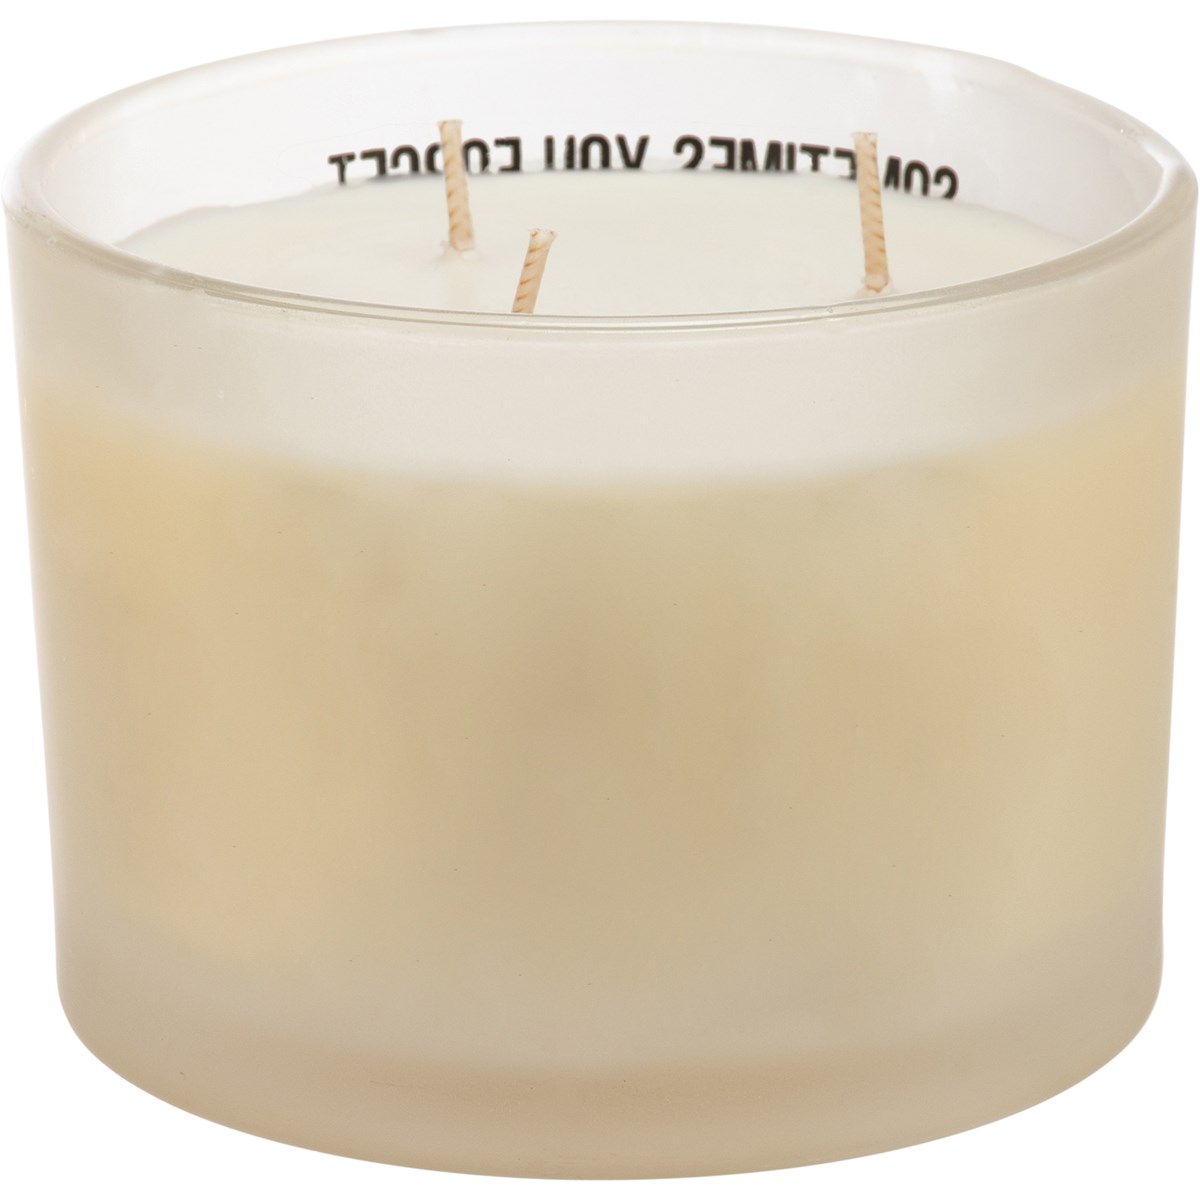 This Is Your Reminder Candle - Soy Wax, Glass, Cotton